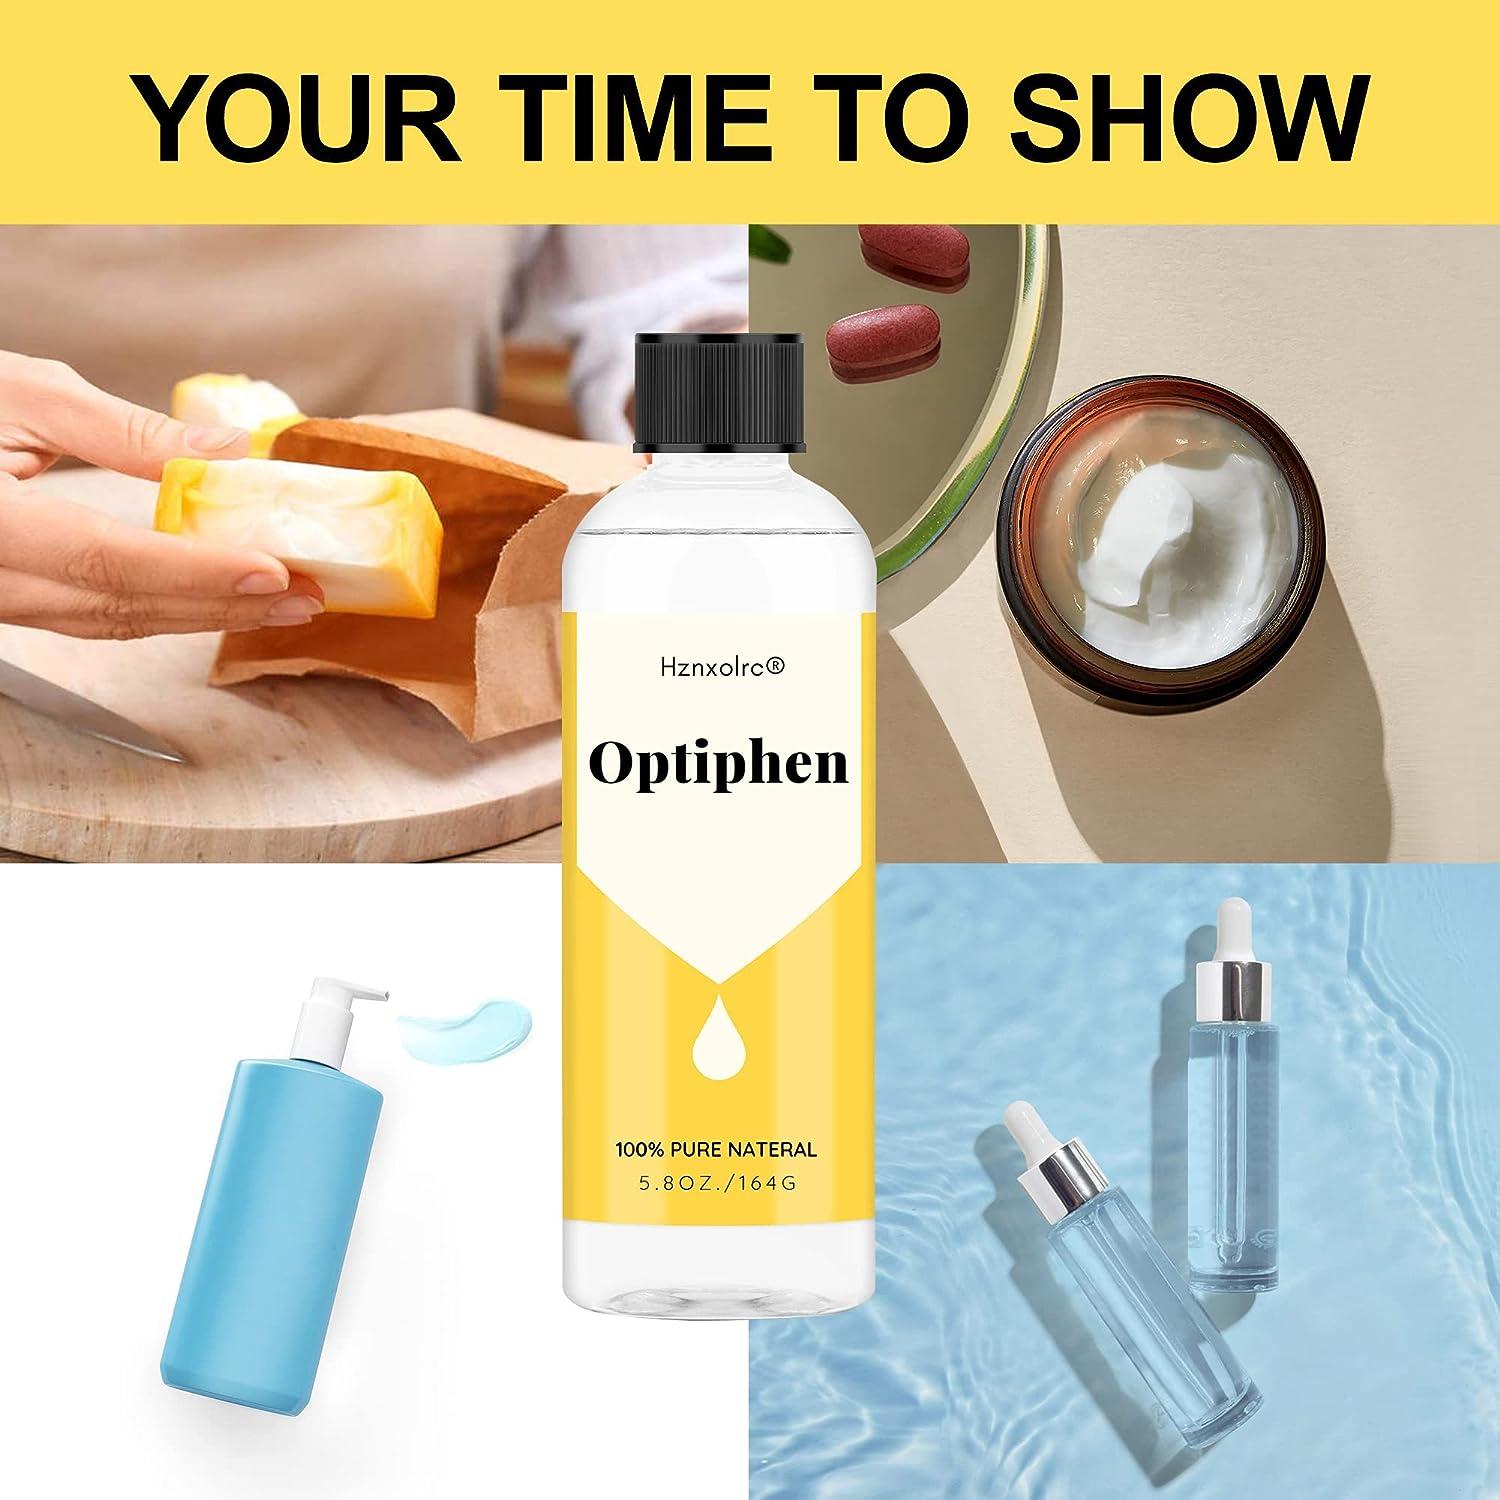 5.8 oz Optiphen Preservative, Oil Soluble Natural Preservative, Optiphen Suitable for Making Soap, Conditioners, Lotion, Creams and More